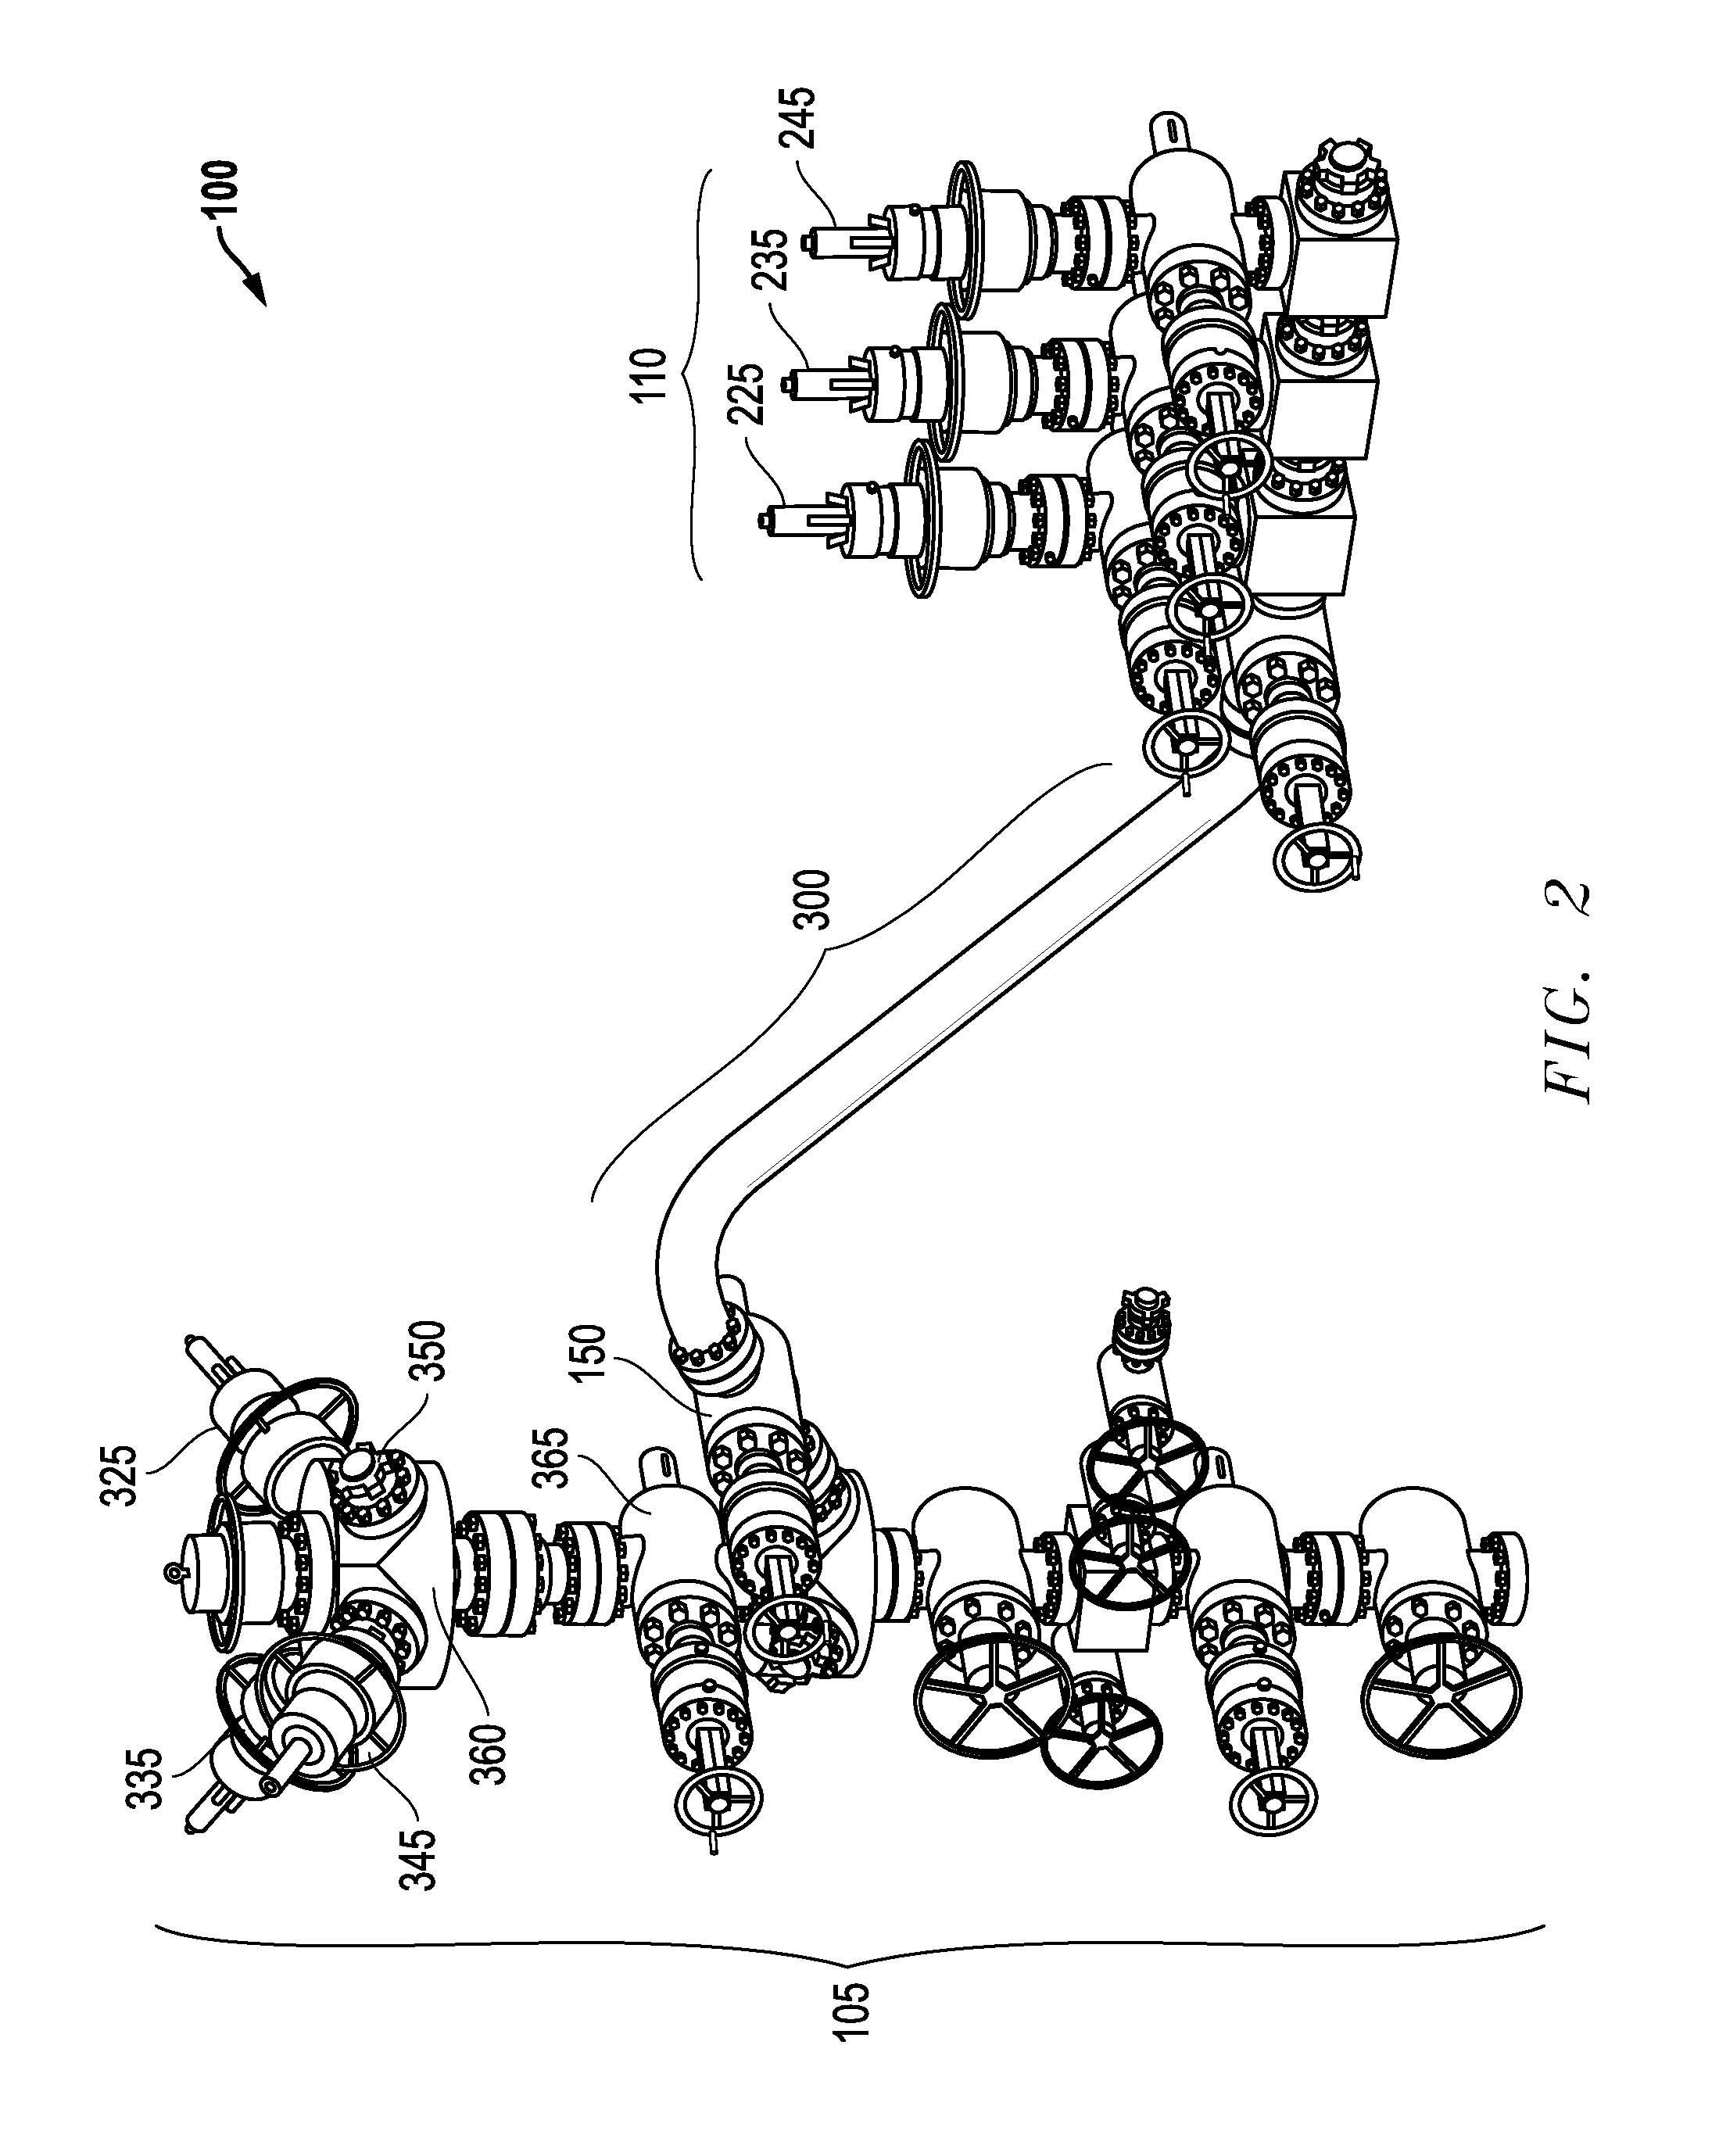 Ball injector system apparatus and method